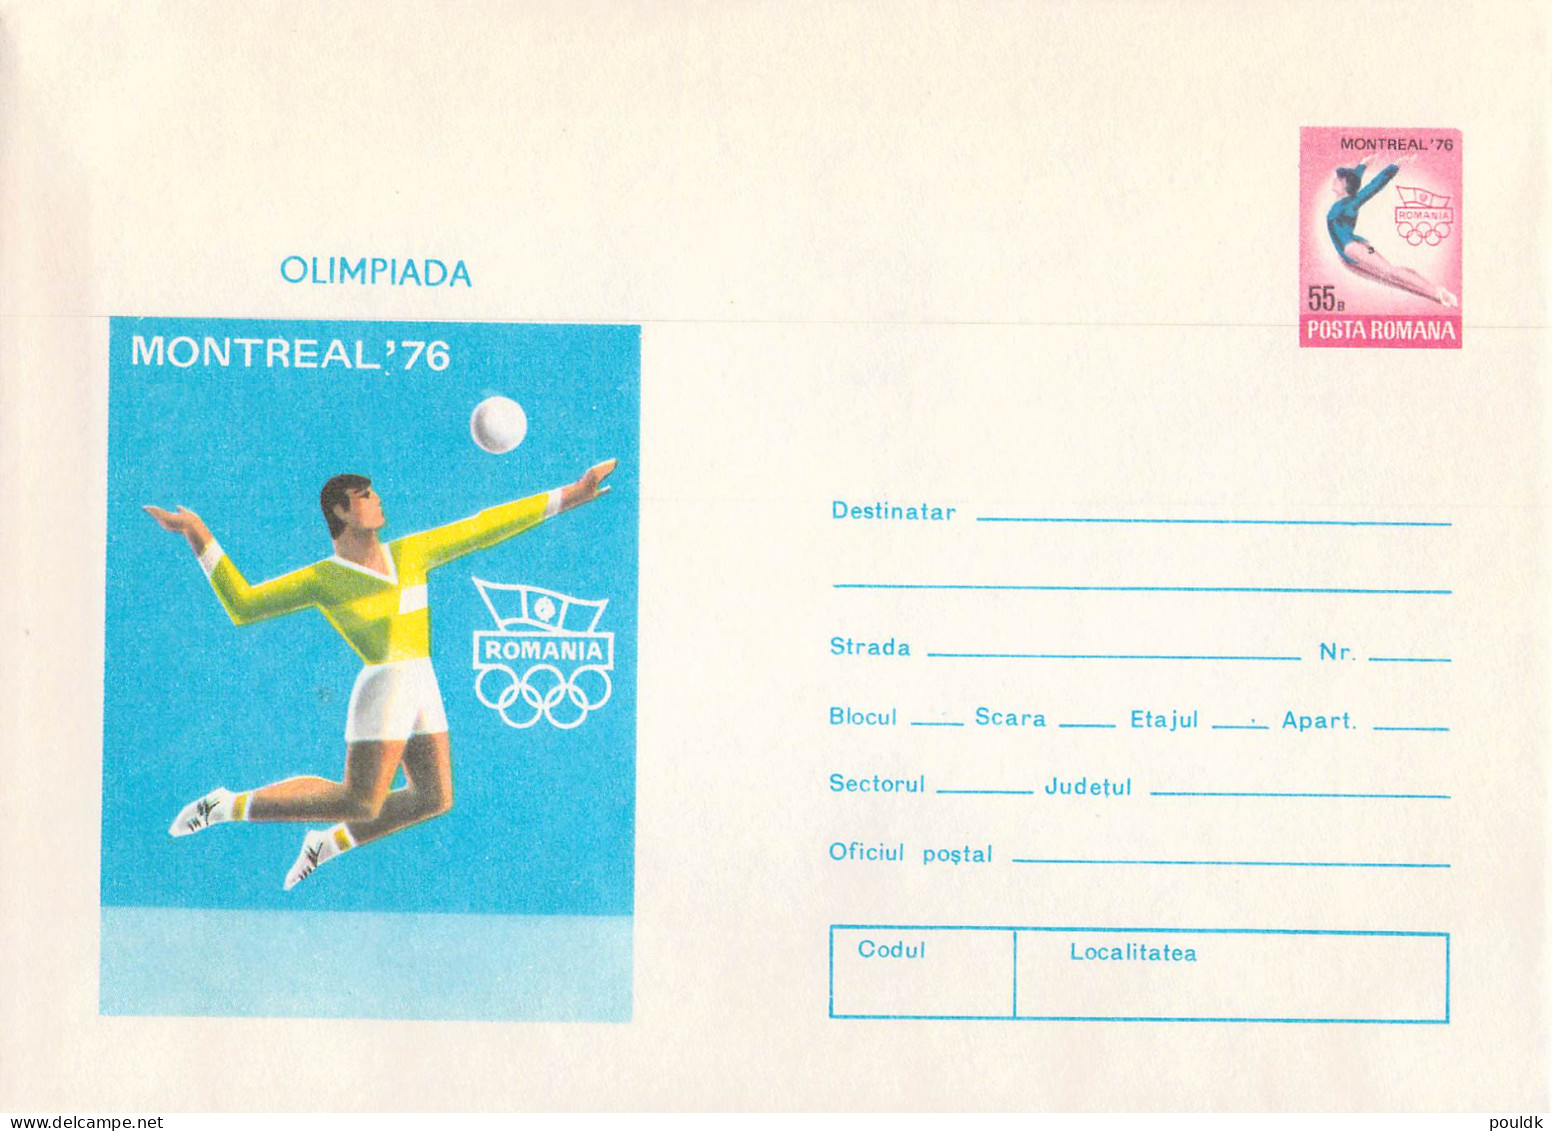 Romania 1976 Olympic Games in Montreal 1976 - 6 postal stationaries mint. Postal Weight 0,09 kg. Please read Sales